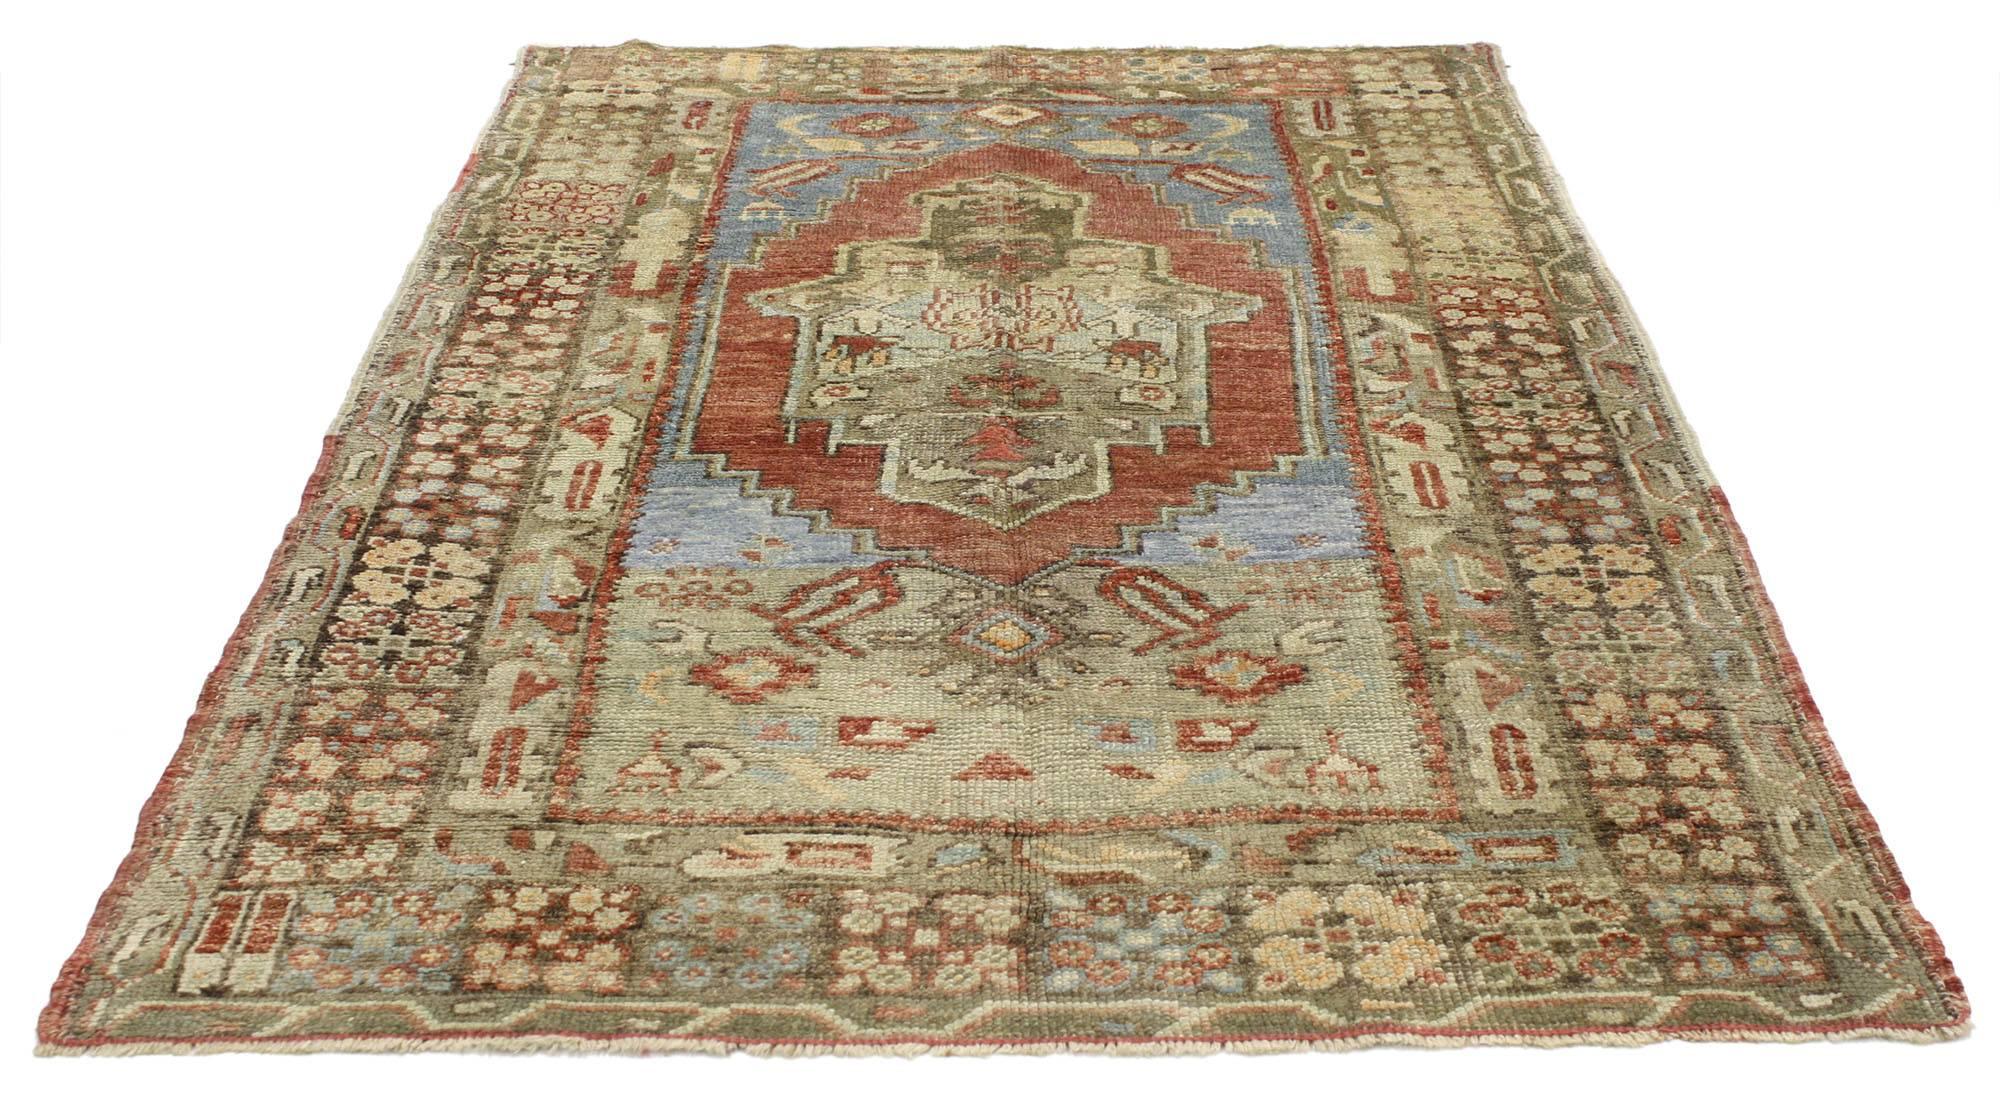 52258 Vintage Turkish Oushak Rug with Rustic Artisan Style 03'04 x 05'03. Warm and inviting, this hand-knotted wool vintage Turkish Oushak rug beautifully displays rustic artisan charm. It features a central medallion with stepped edges surrounded